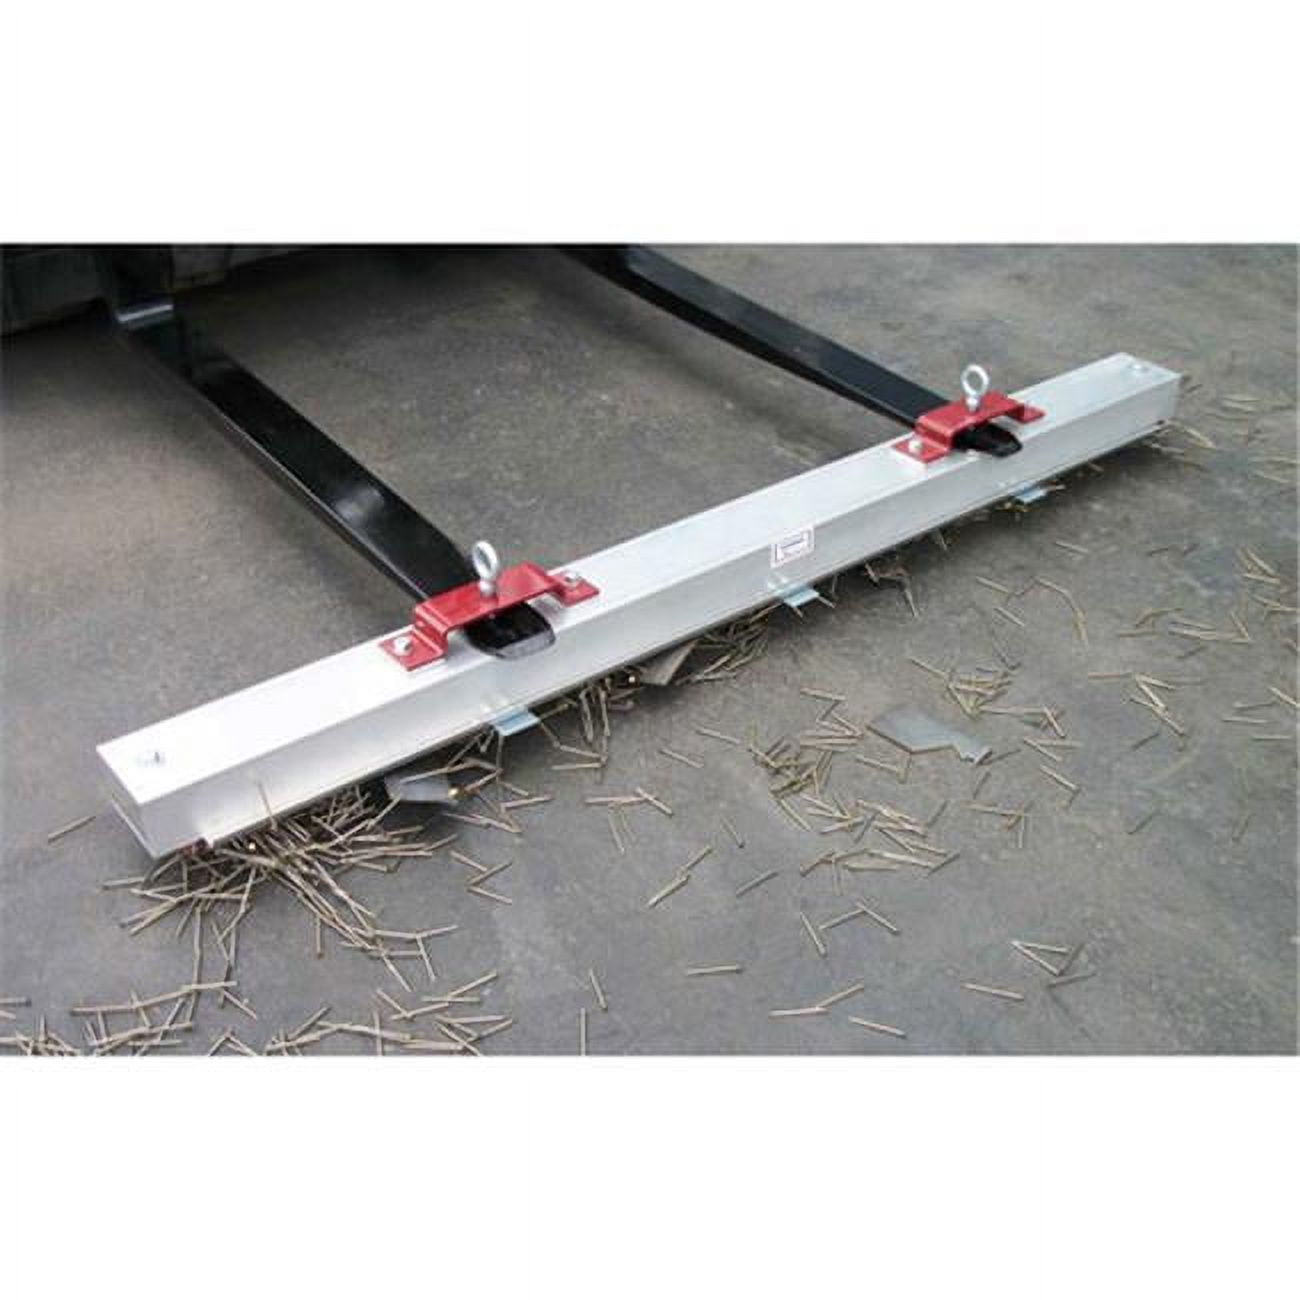 Picture of AMK Magnetics RDS-48LR 48 in. Double Strength Load Release Road Mag Sweeper - Silver & Burgundy